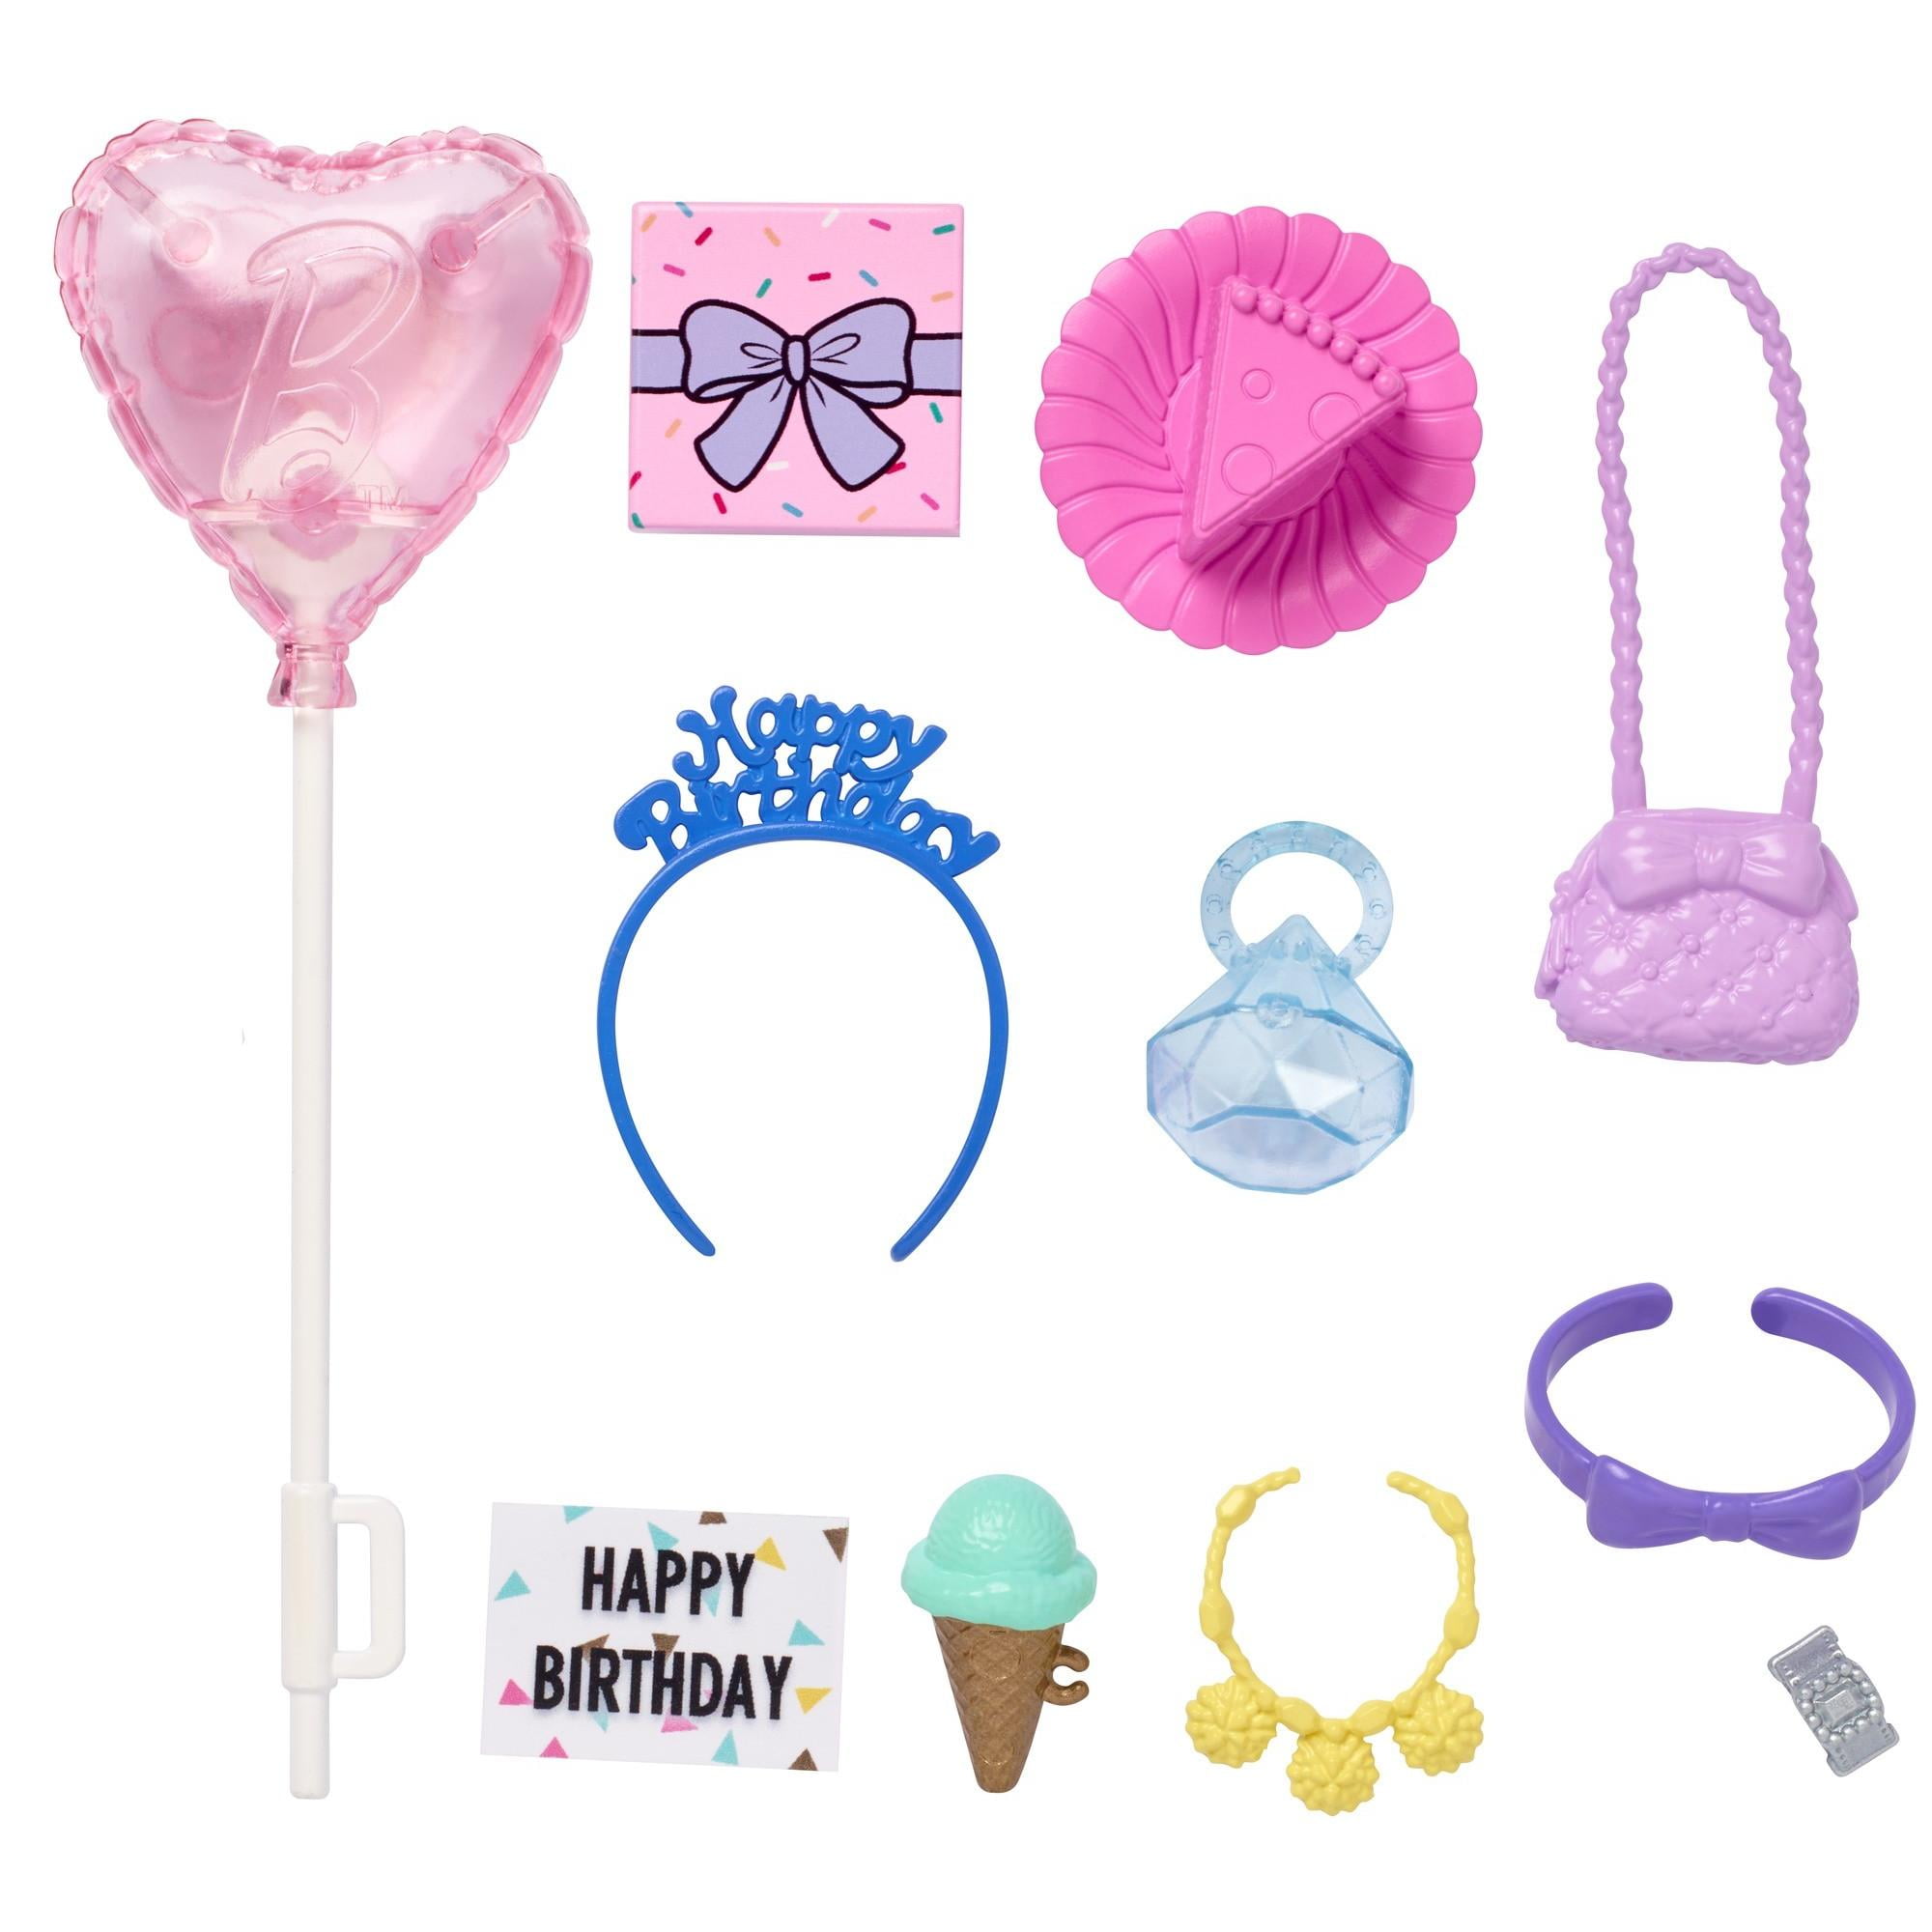 Barbie Storytelling Sunday Funday Accessories Fashion Pack Playset Ghx33 for sale online 